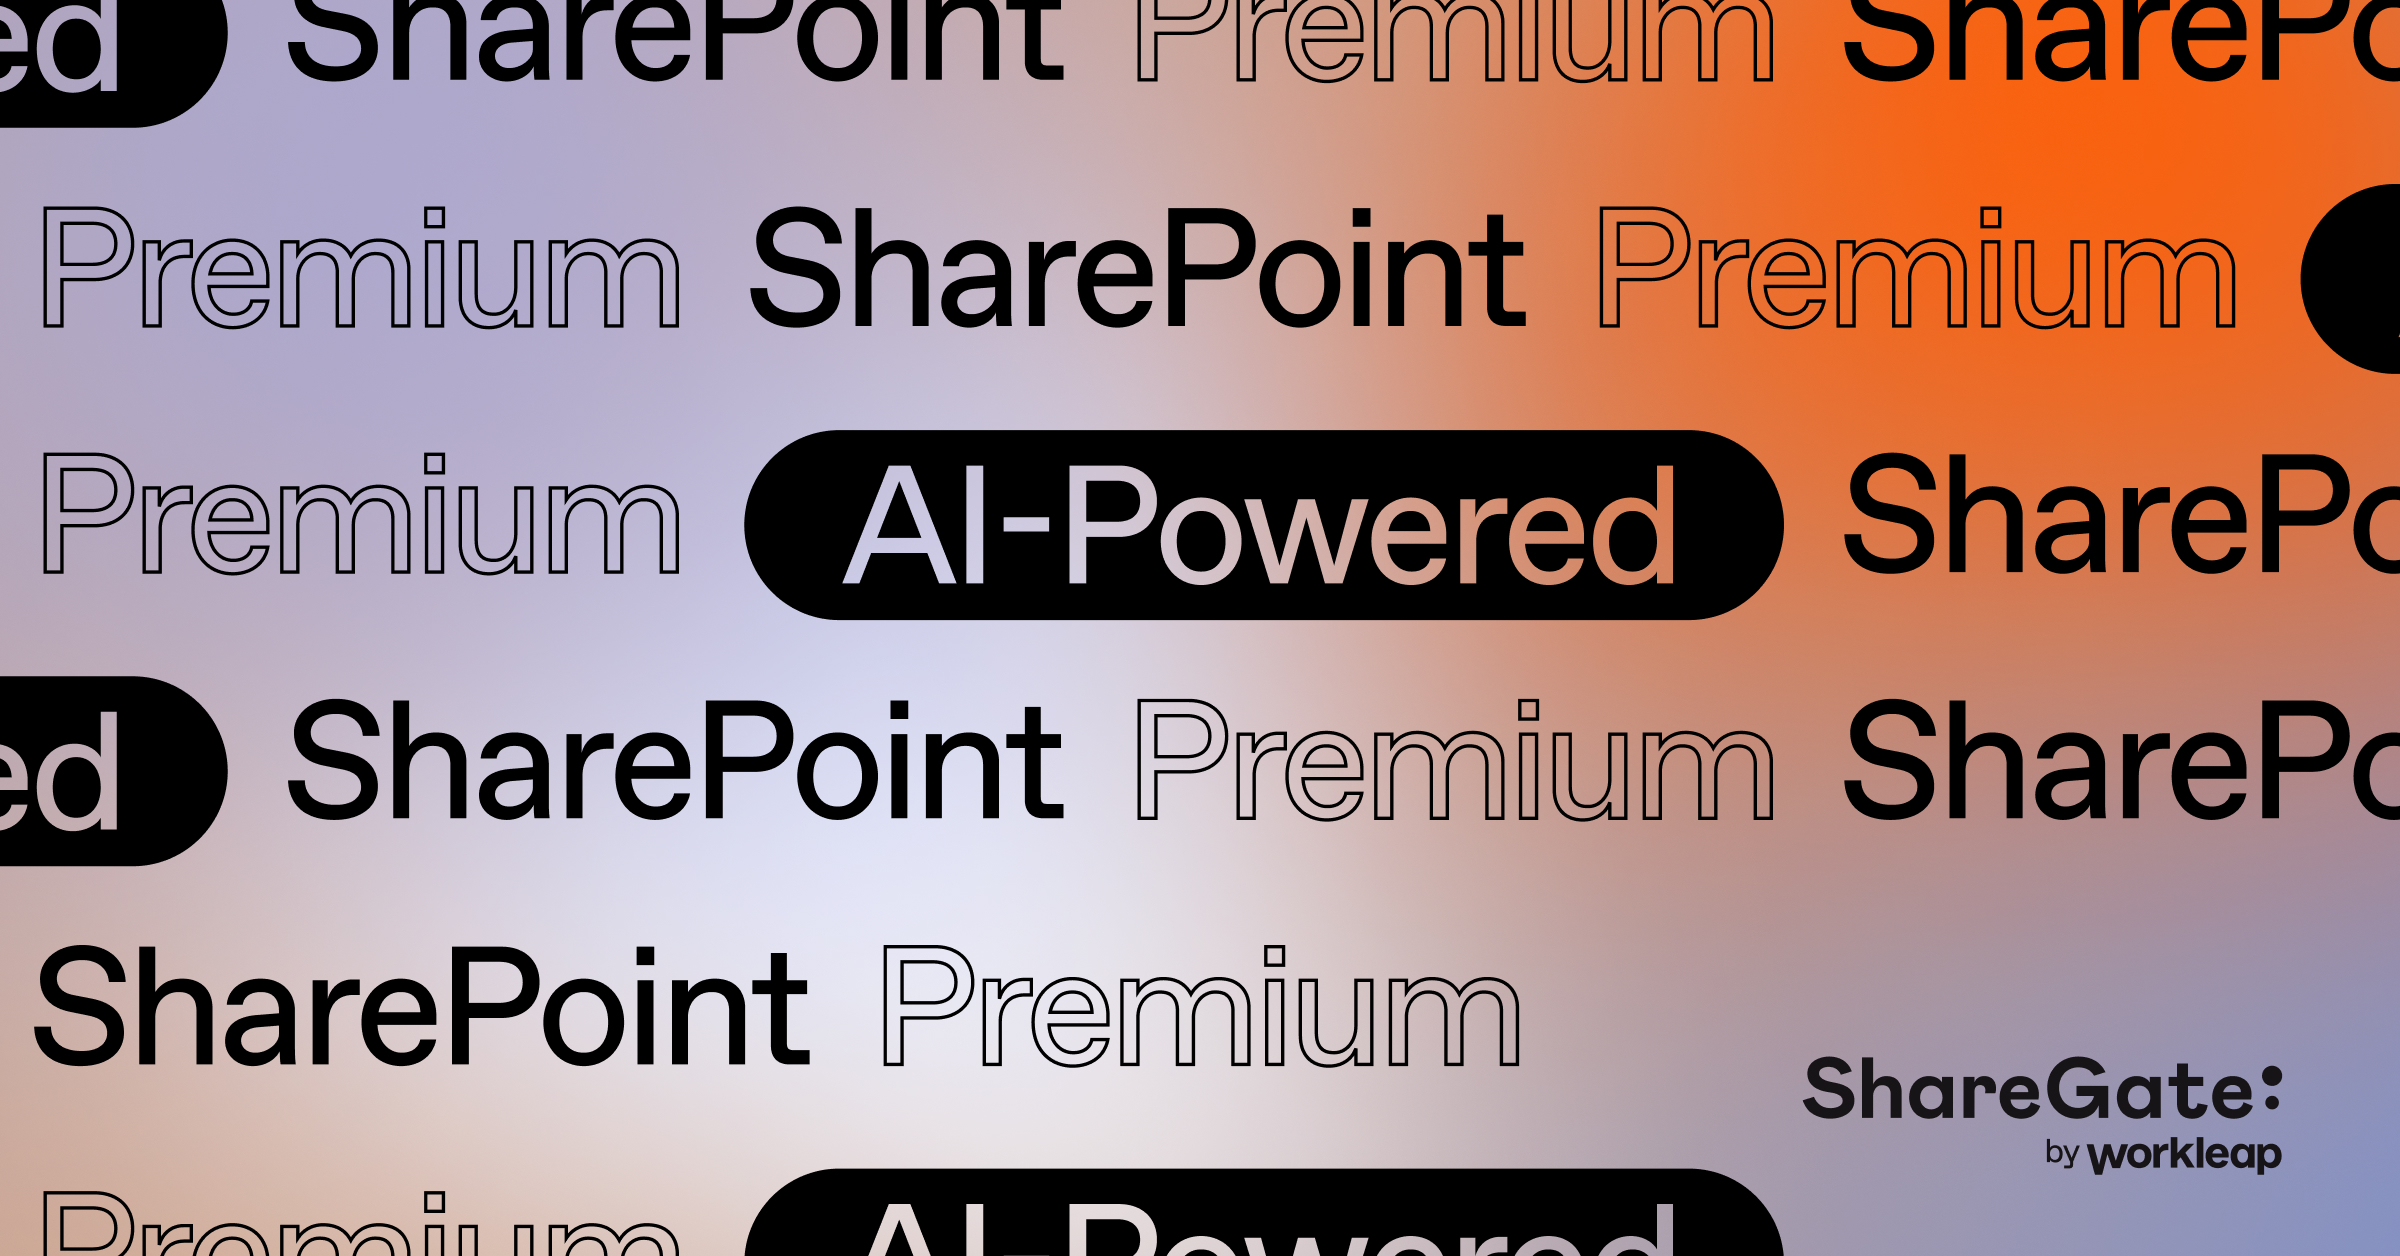 What is SharePoint Premium, and do you need it?